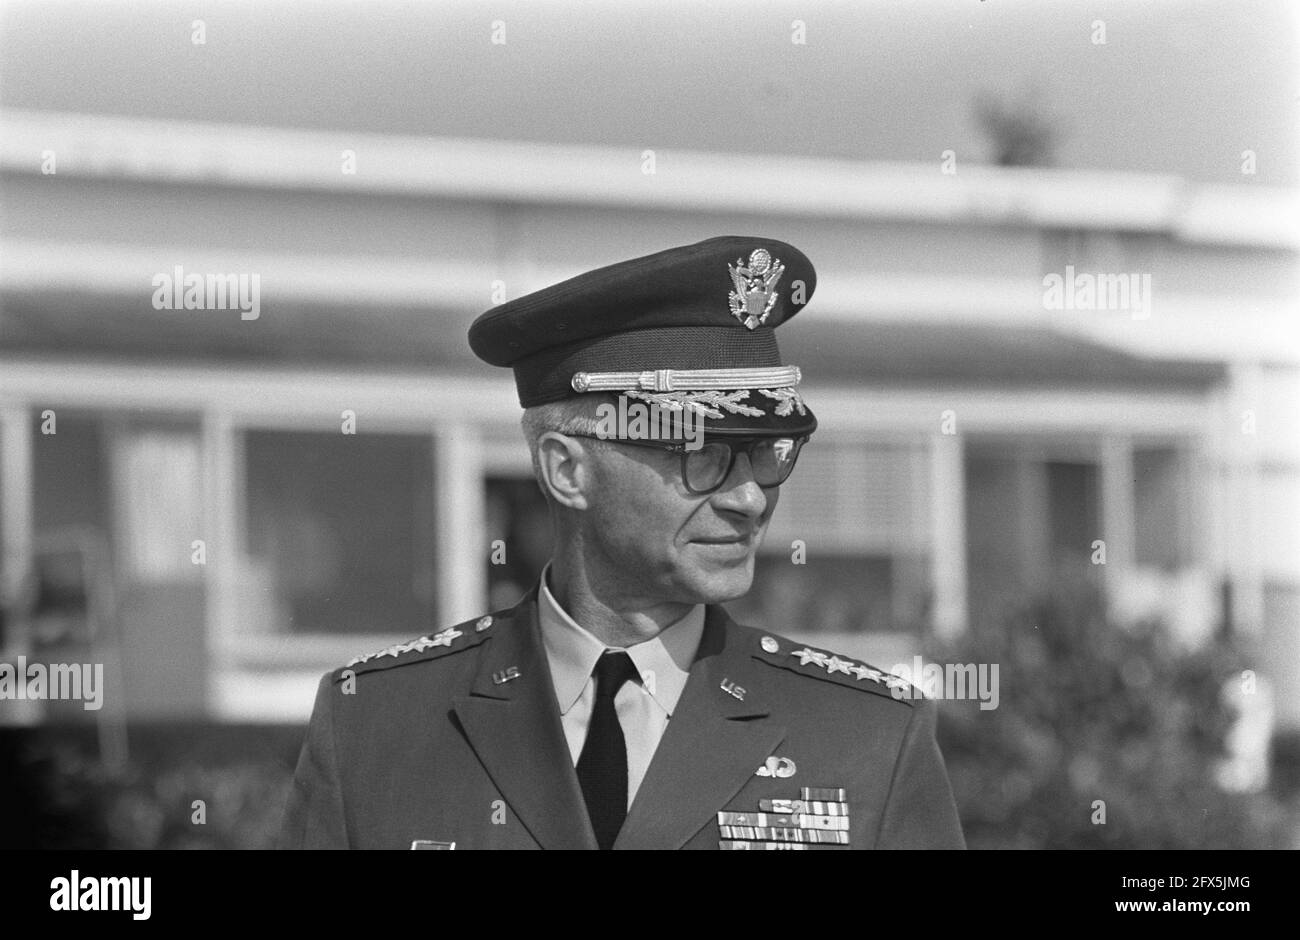 General A. J. Goodpaster, Commander-in-Chief of Allied Forces in Europe, arrives at Ypenburg: from left to right H. M. V. D. Wal Bake, Goodpaster,  September 8, 1969, generals, commanders-in-chief, The Netherlands, 20th century press agency photo, news to remember, documentary, historic photography 1945-1990, visual stories, human history of the Twentieth Century, capturing moments in time Stock Photo